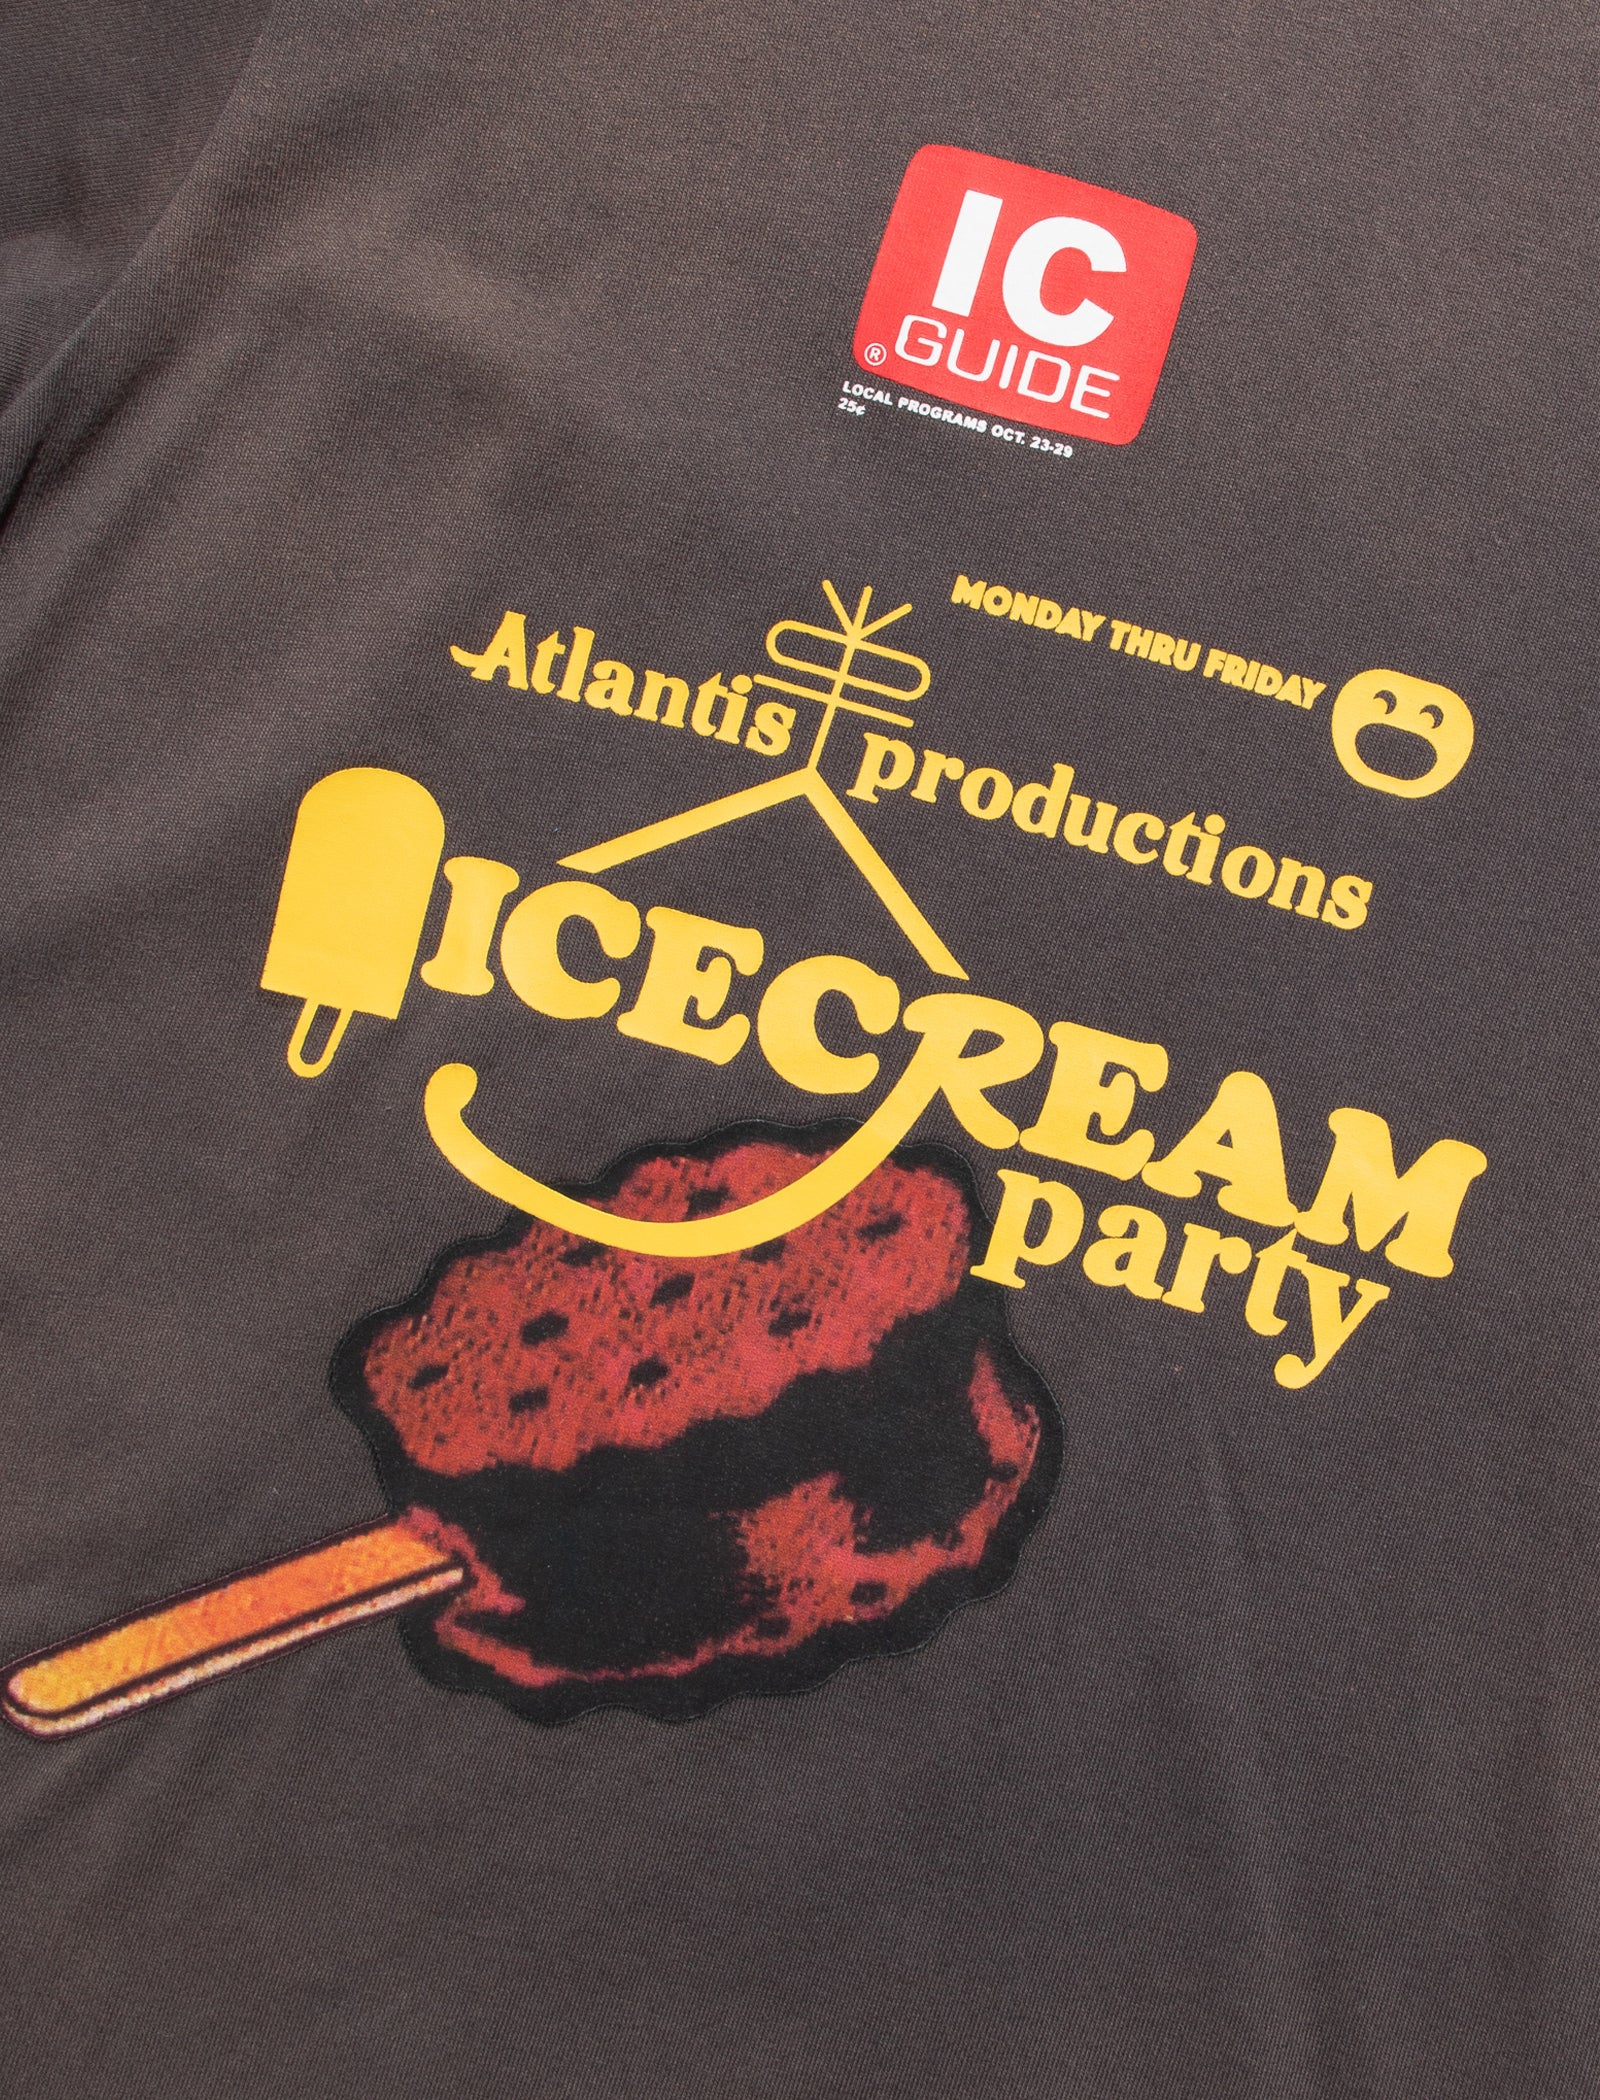 ICECREAM CHECK IN FOR 4 LAUGHS TEE